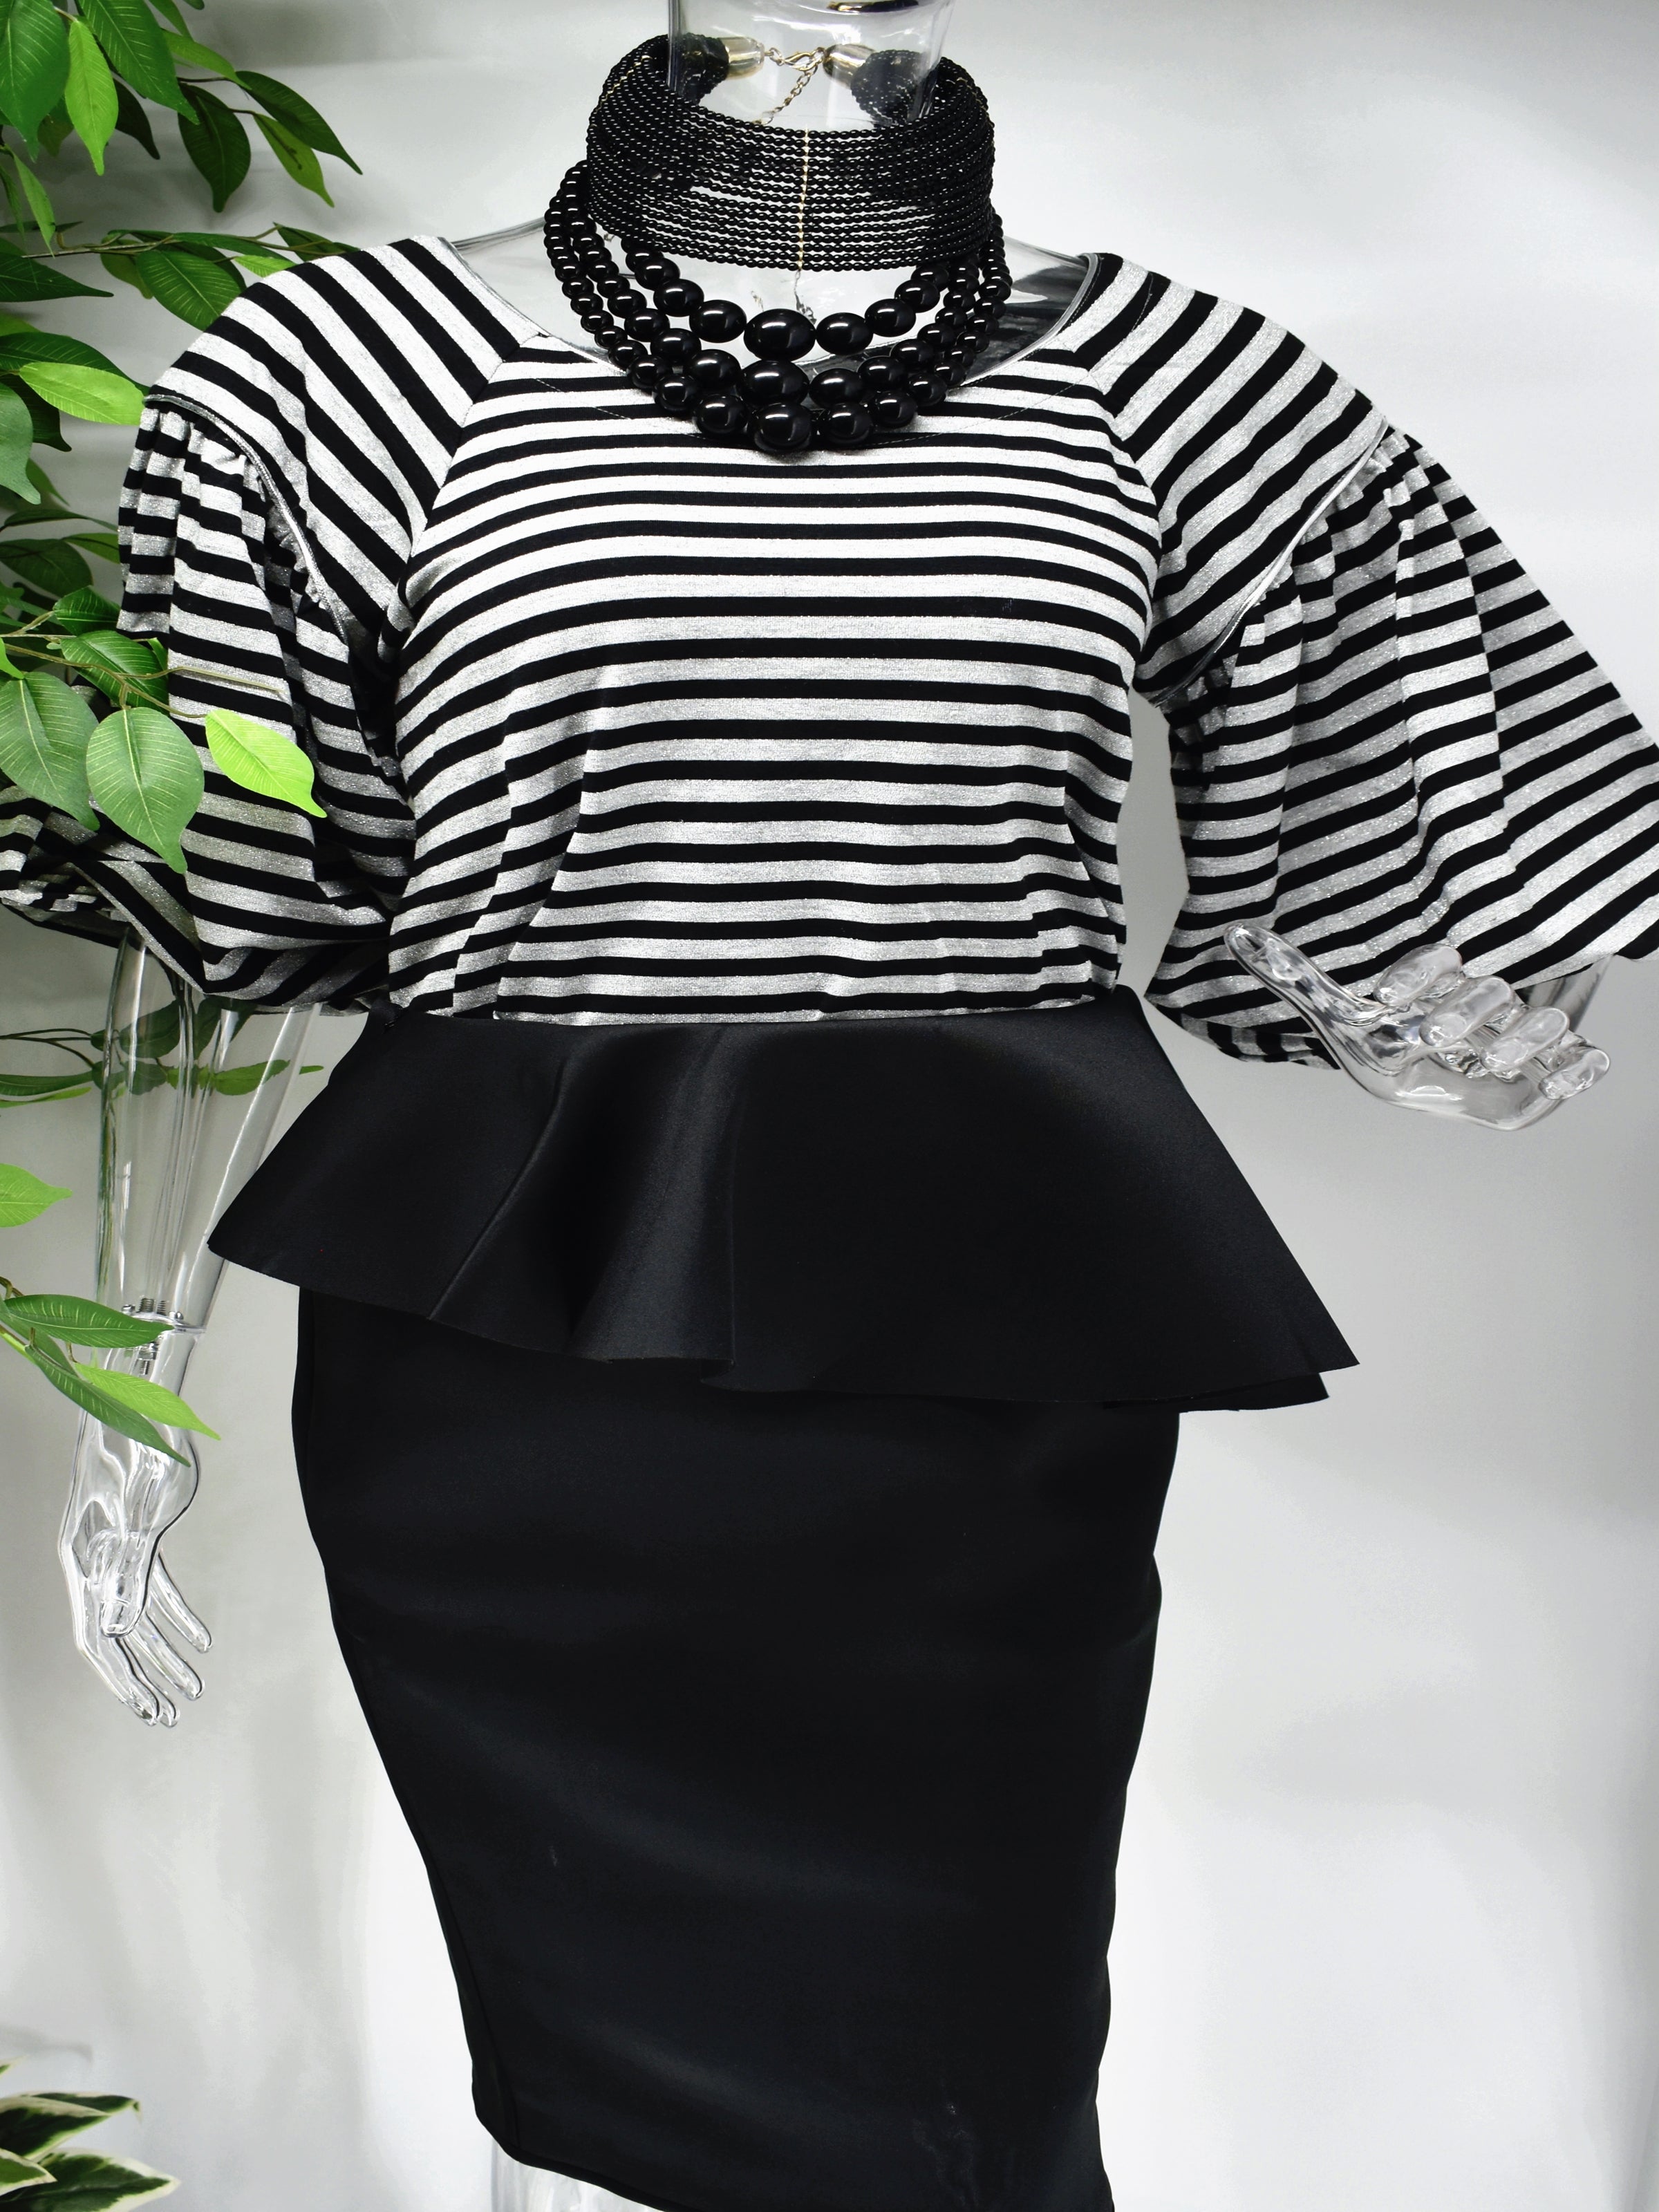 Bring a modern design to a classic staple when you step out in our Bobette stripe top. Bobette has a black and gray striped design with a bateau neckline that is beautifully paired with our high fashion puffed bell sleeve.